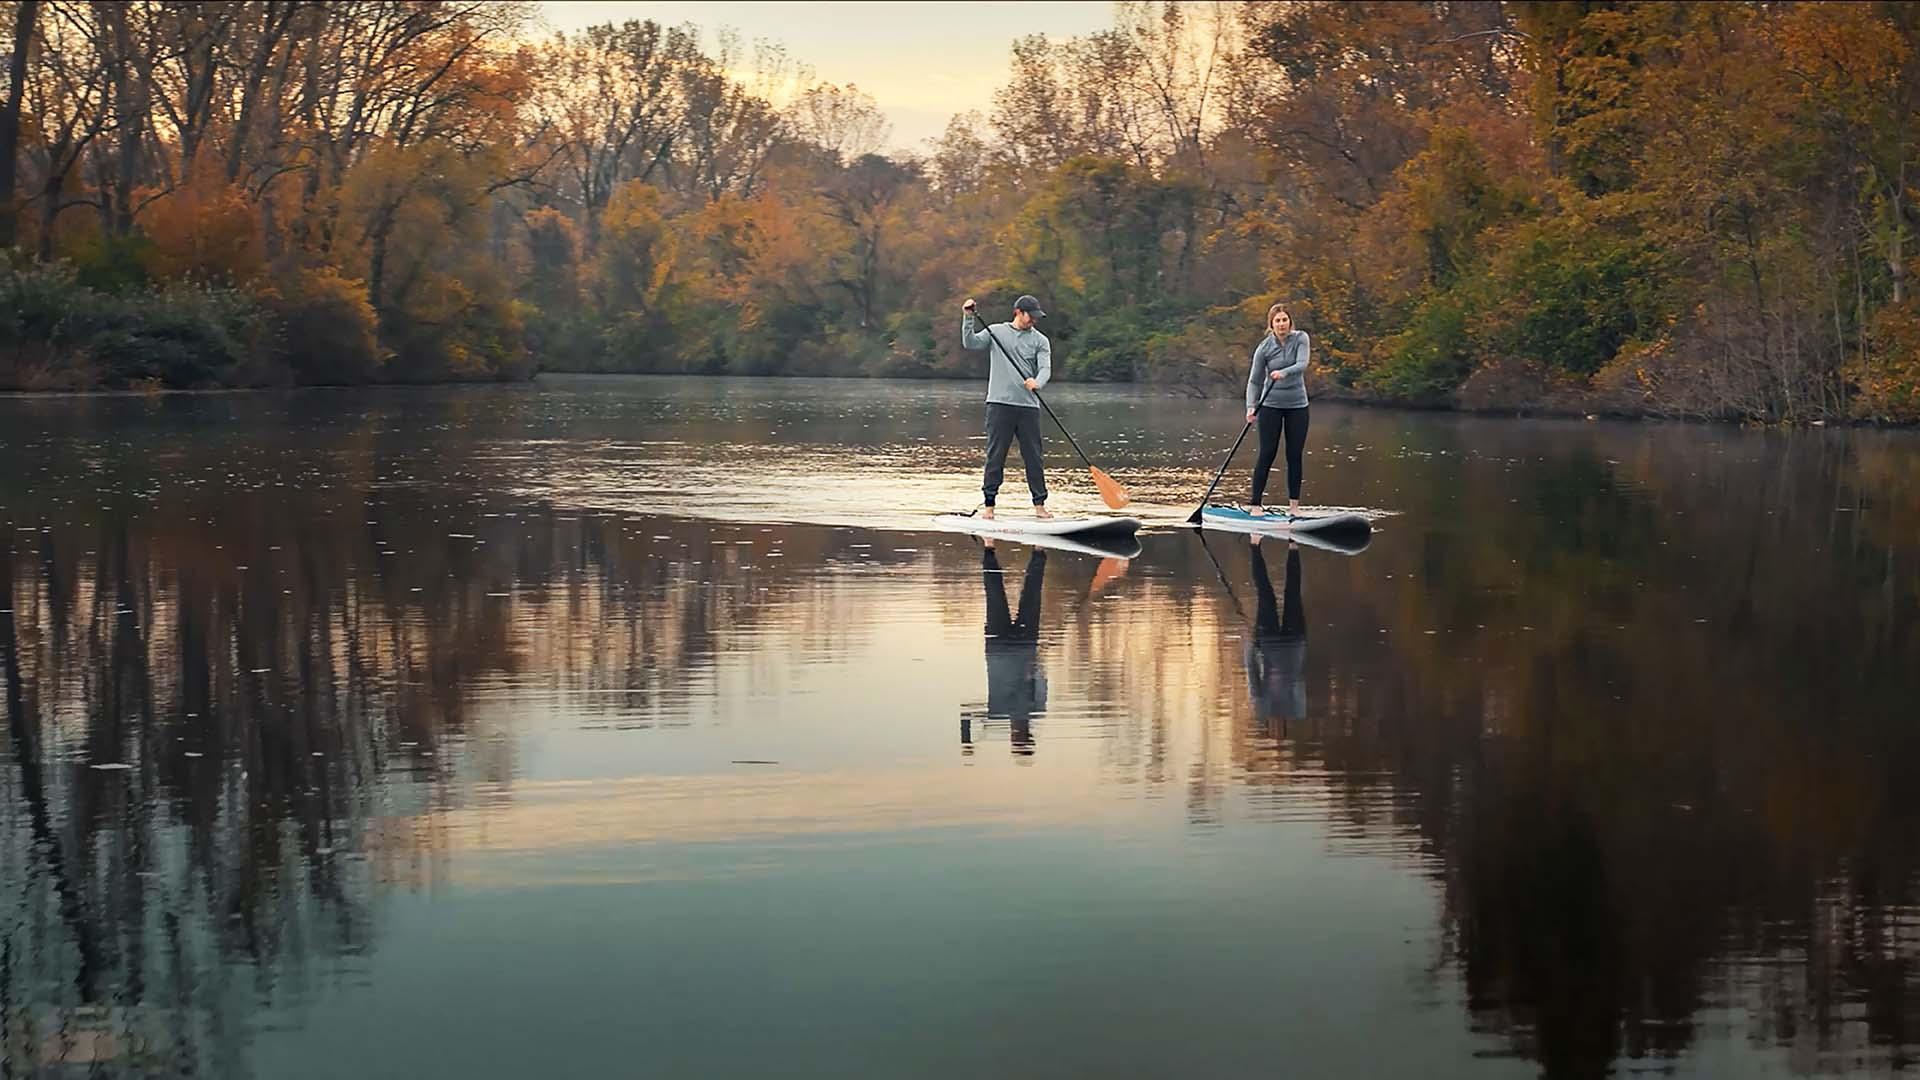 Paddleboarding in the fall.